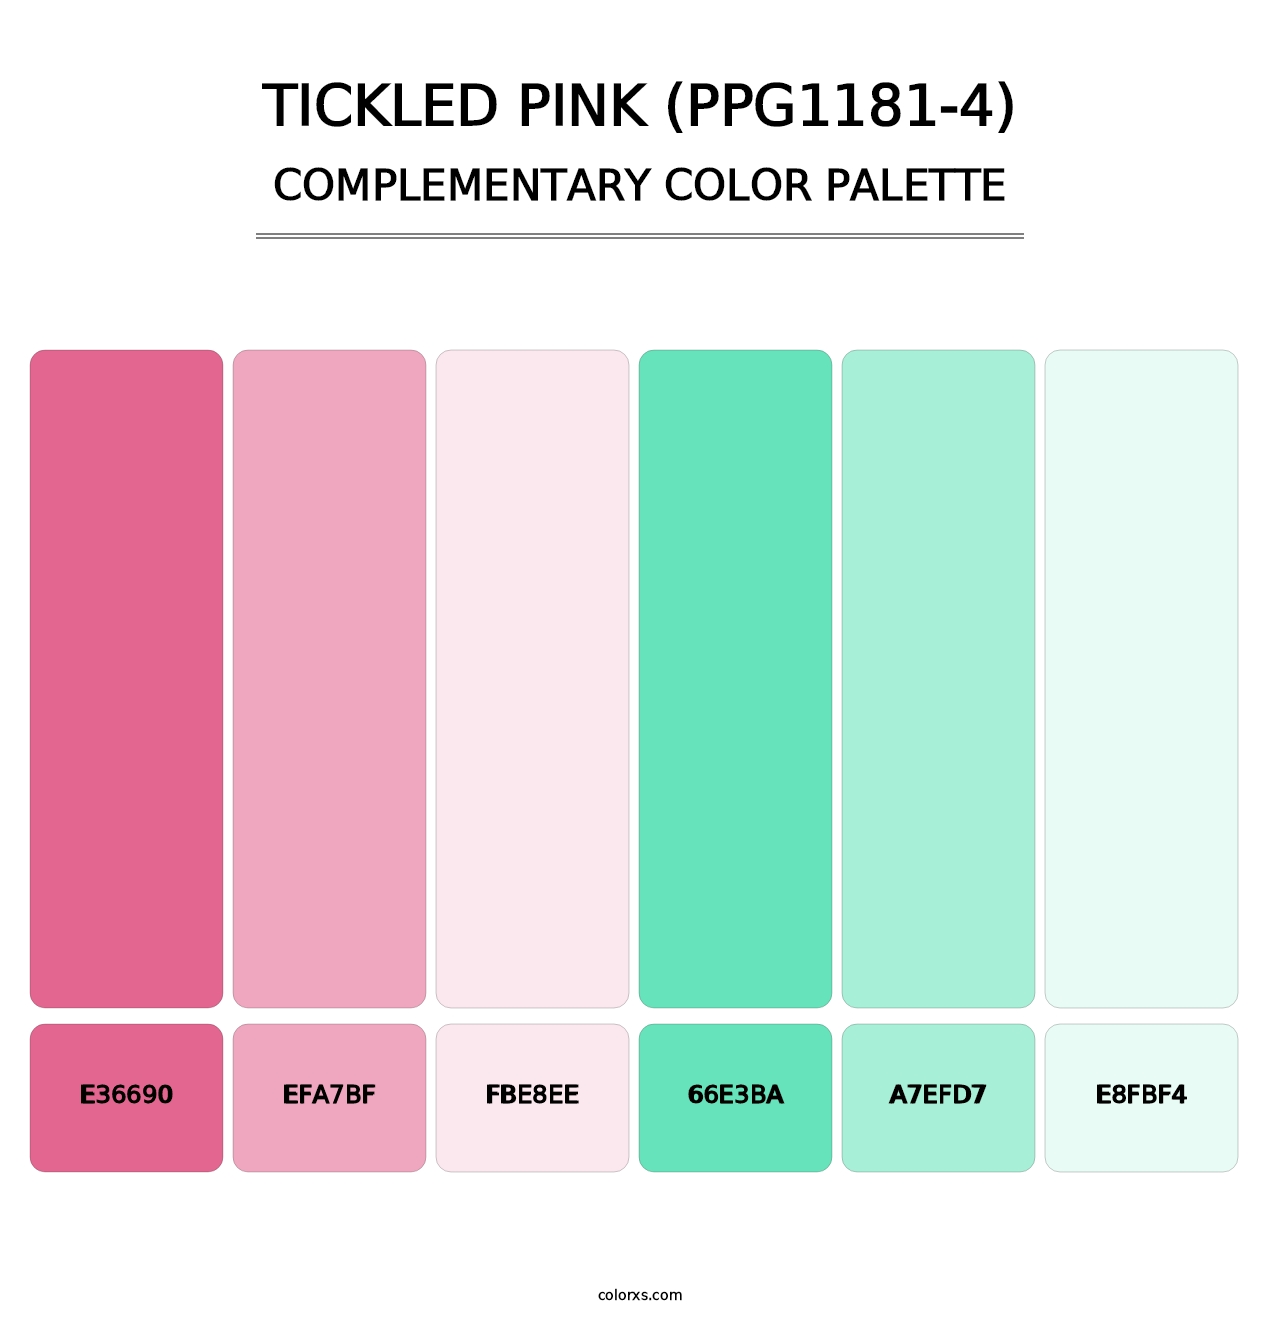 Tickled Pink (PPG1181-4) - Complementary Color Palette